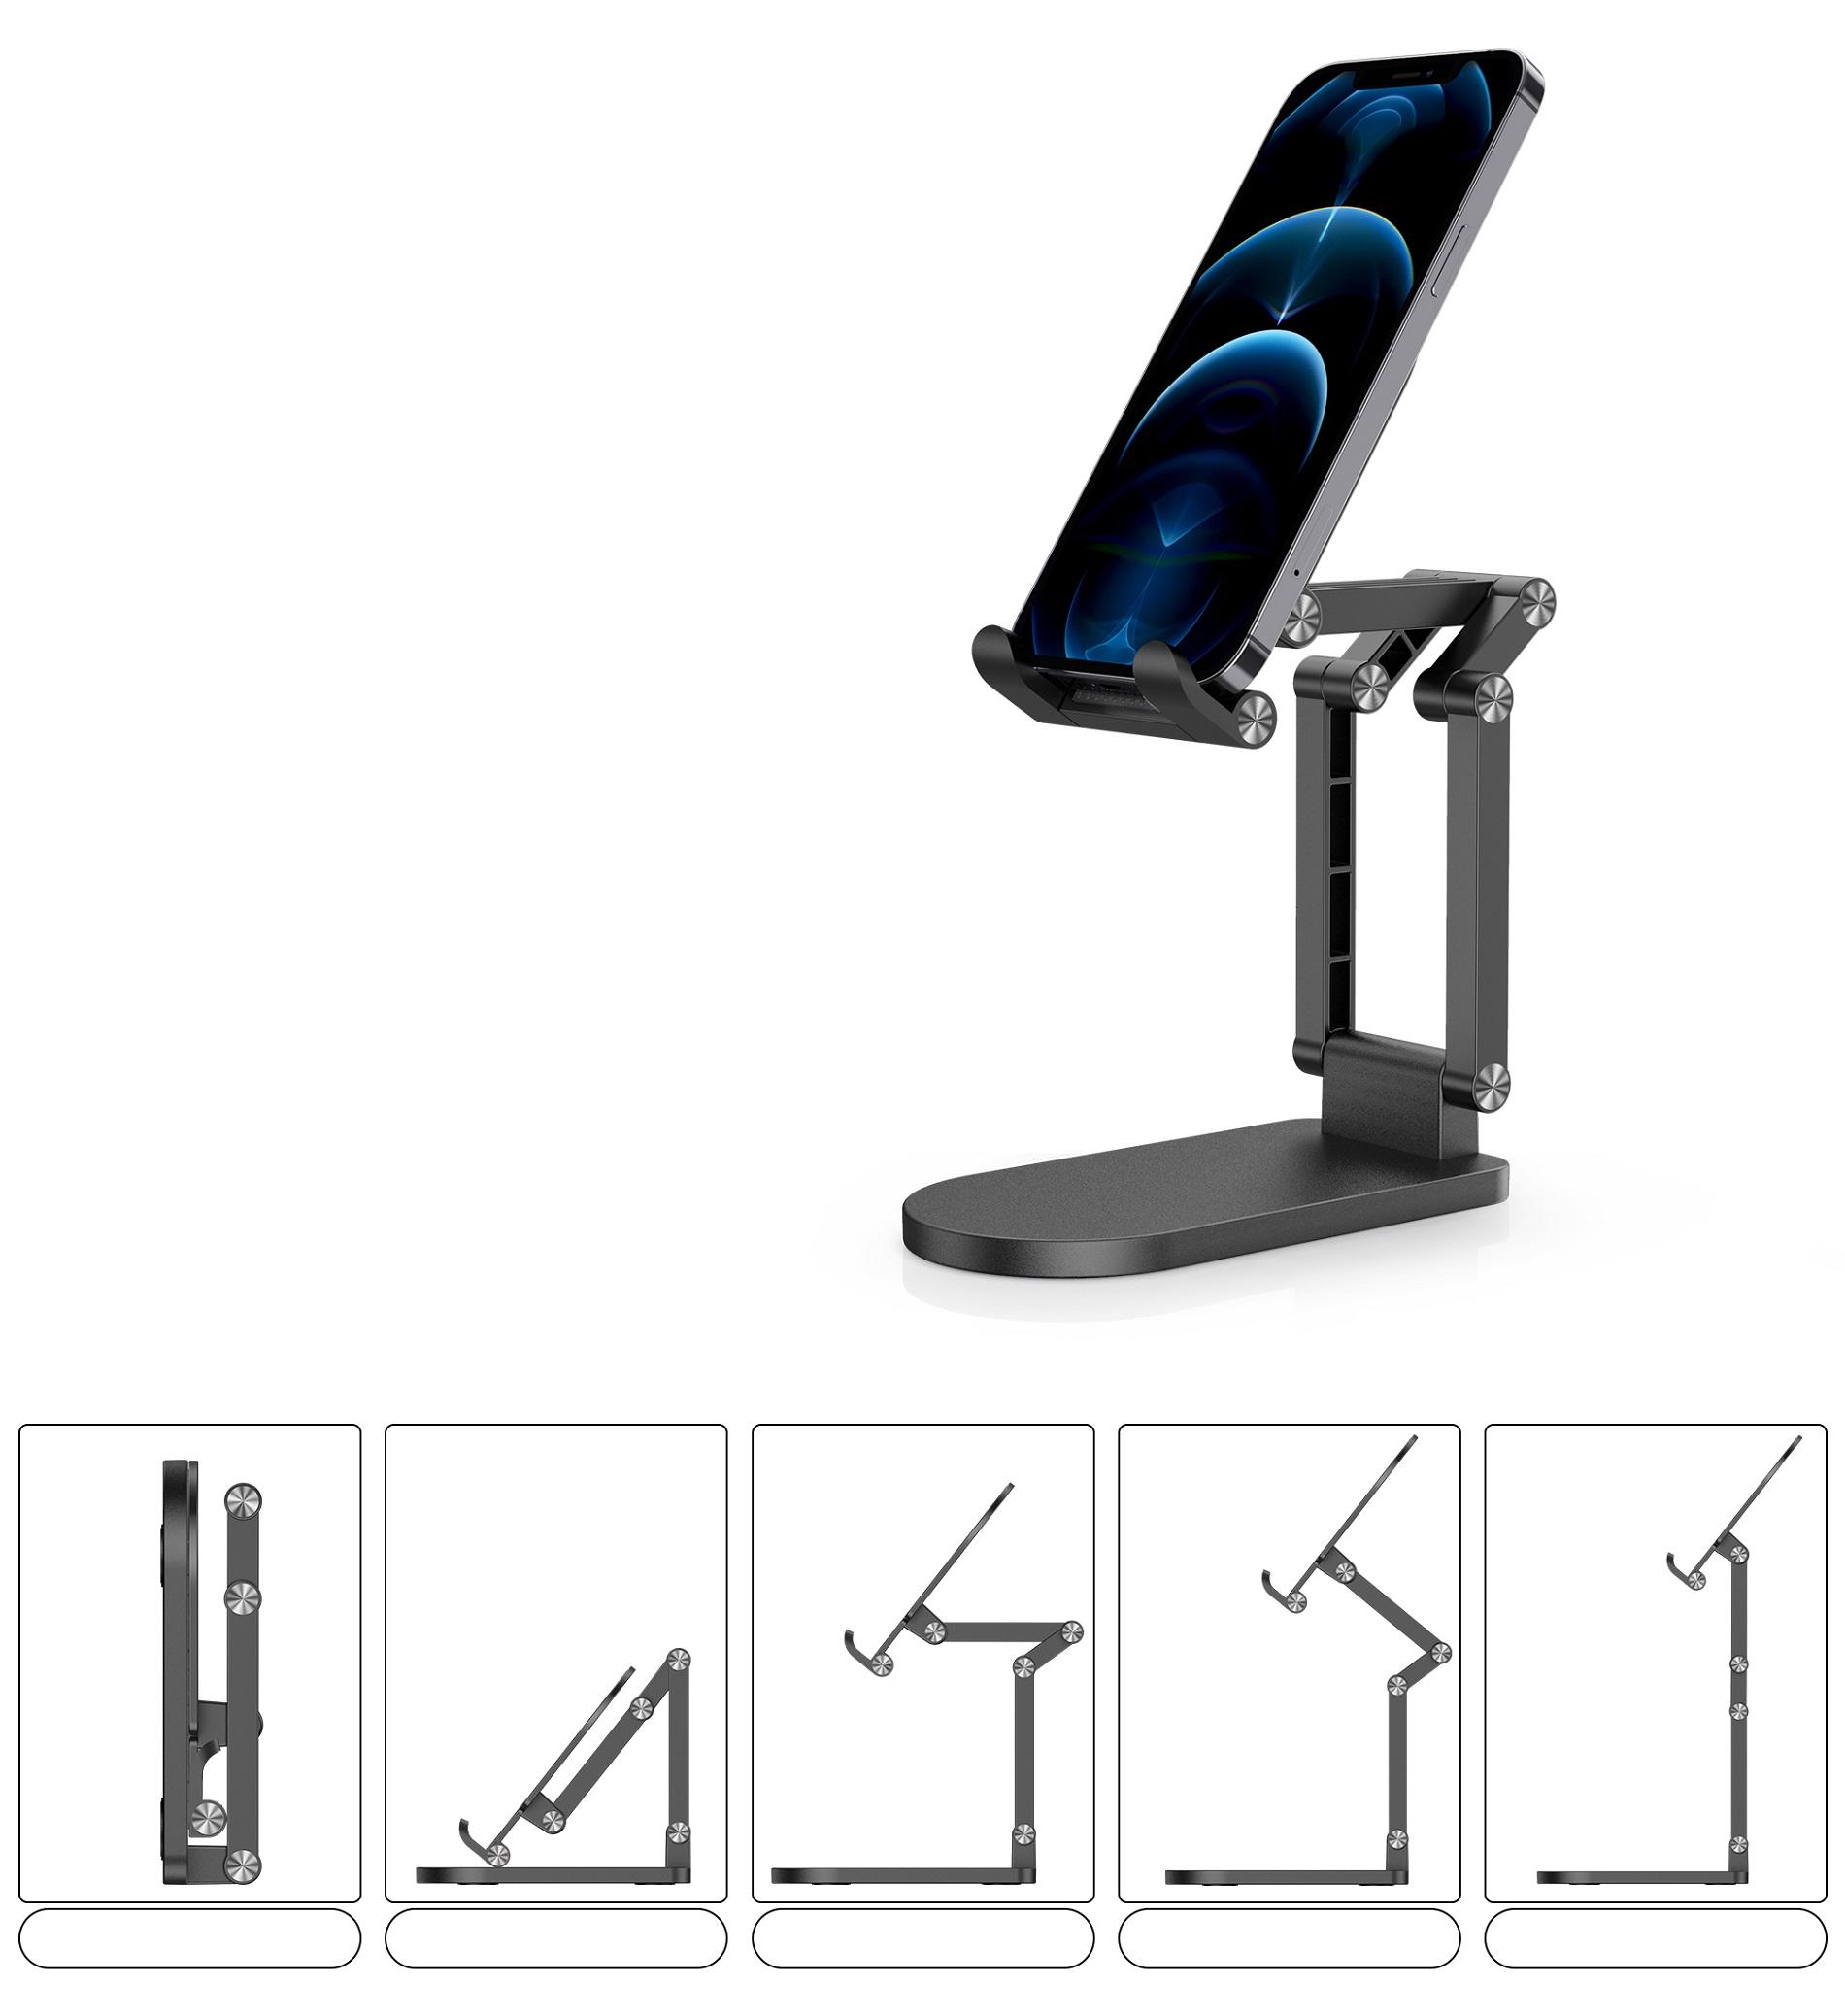 TENCHEN New Popular Portable Phone Angle Adjustable Tablet Cell Phone Holder Stand Desk Foldable Mobile Phone Holders